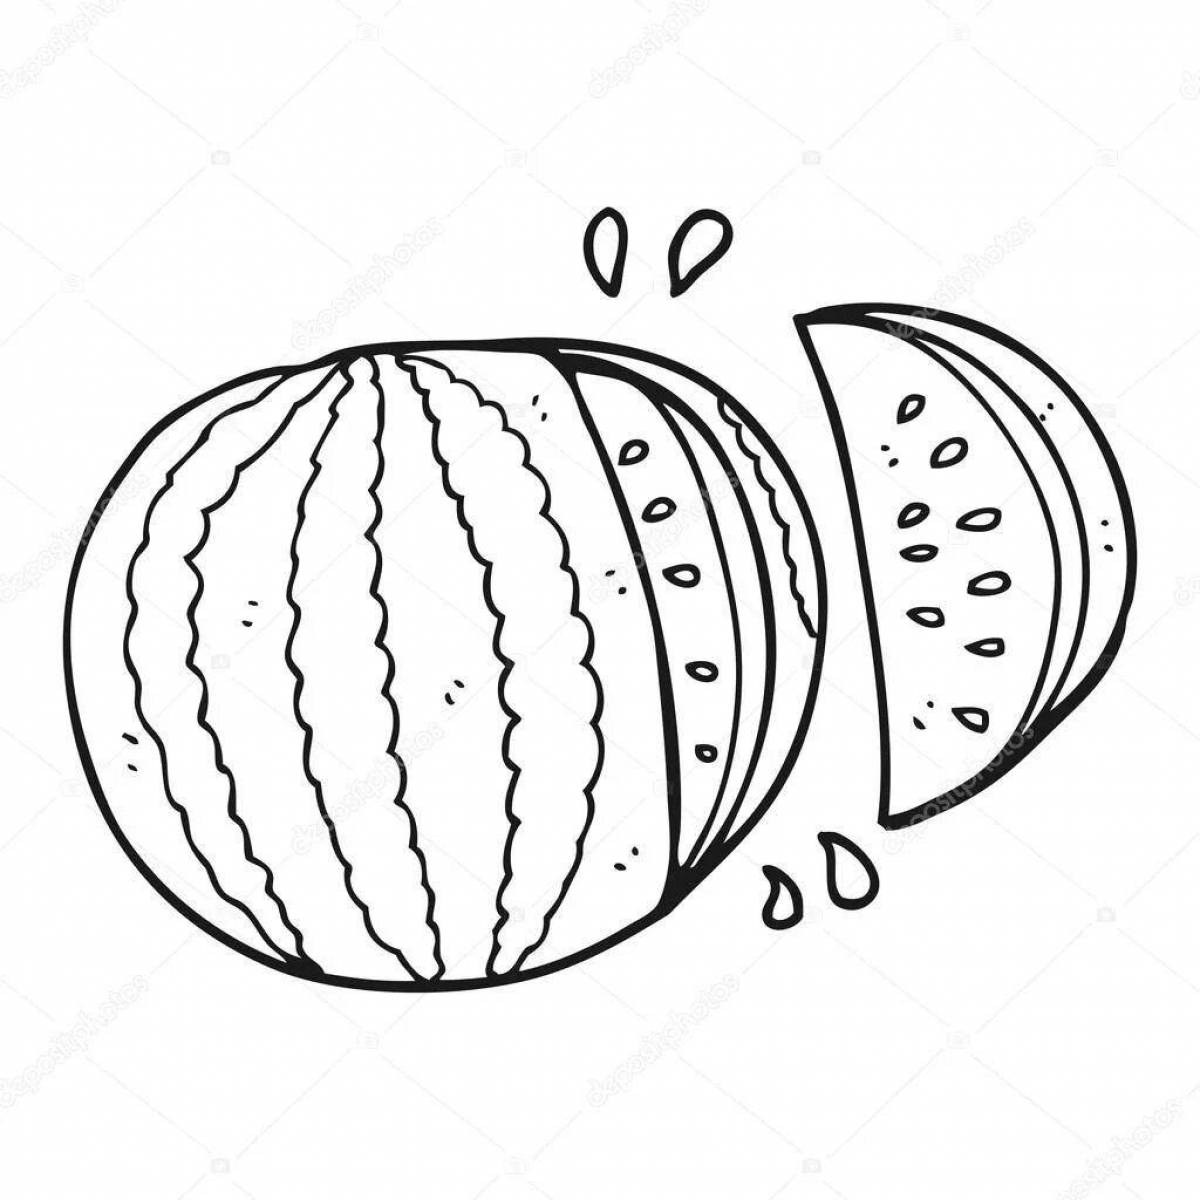 Animated watermelon coloring page for the little ones